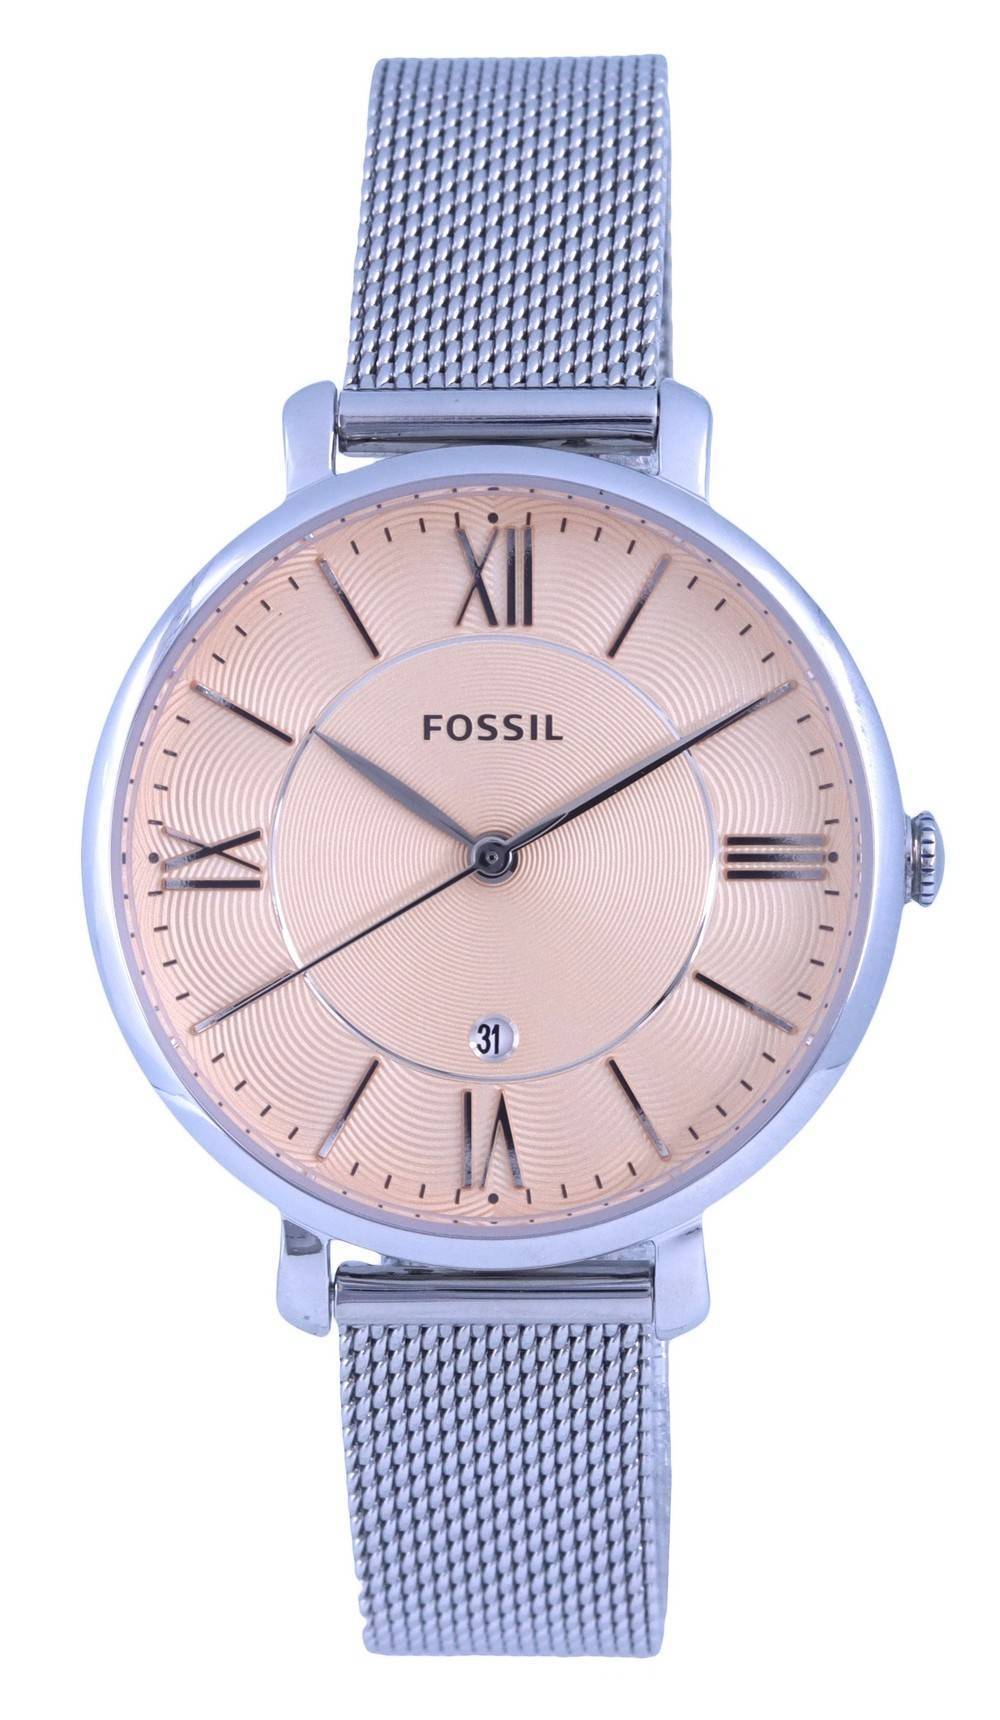 Fossil Pink Dial Watch | escapeauthority.com